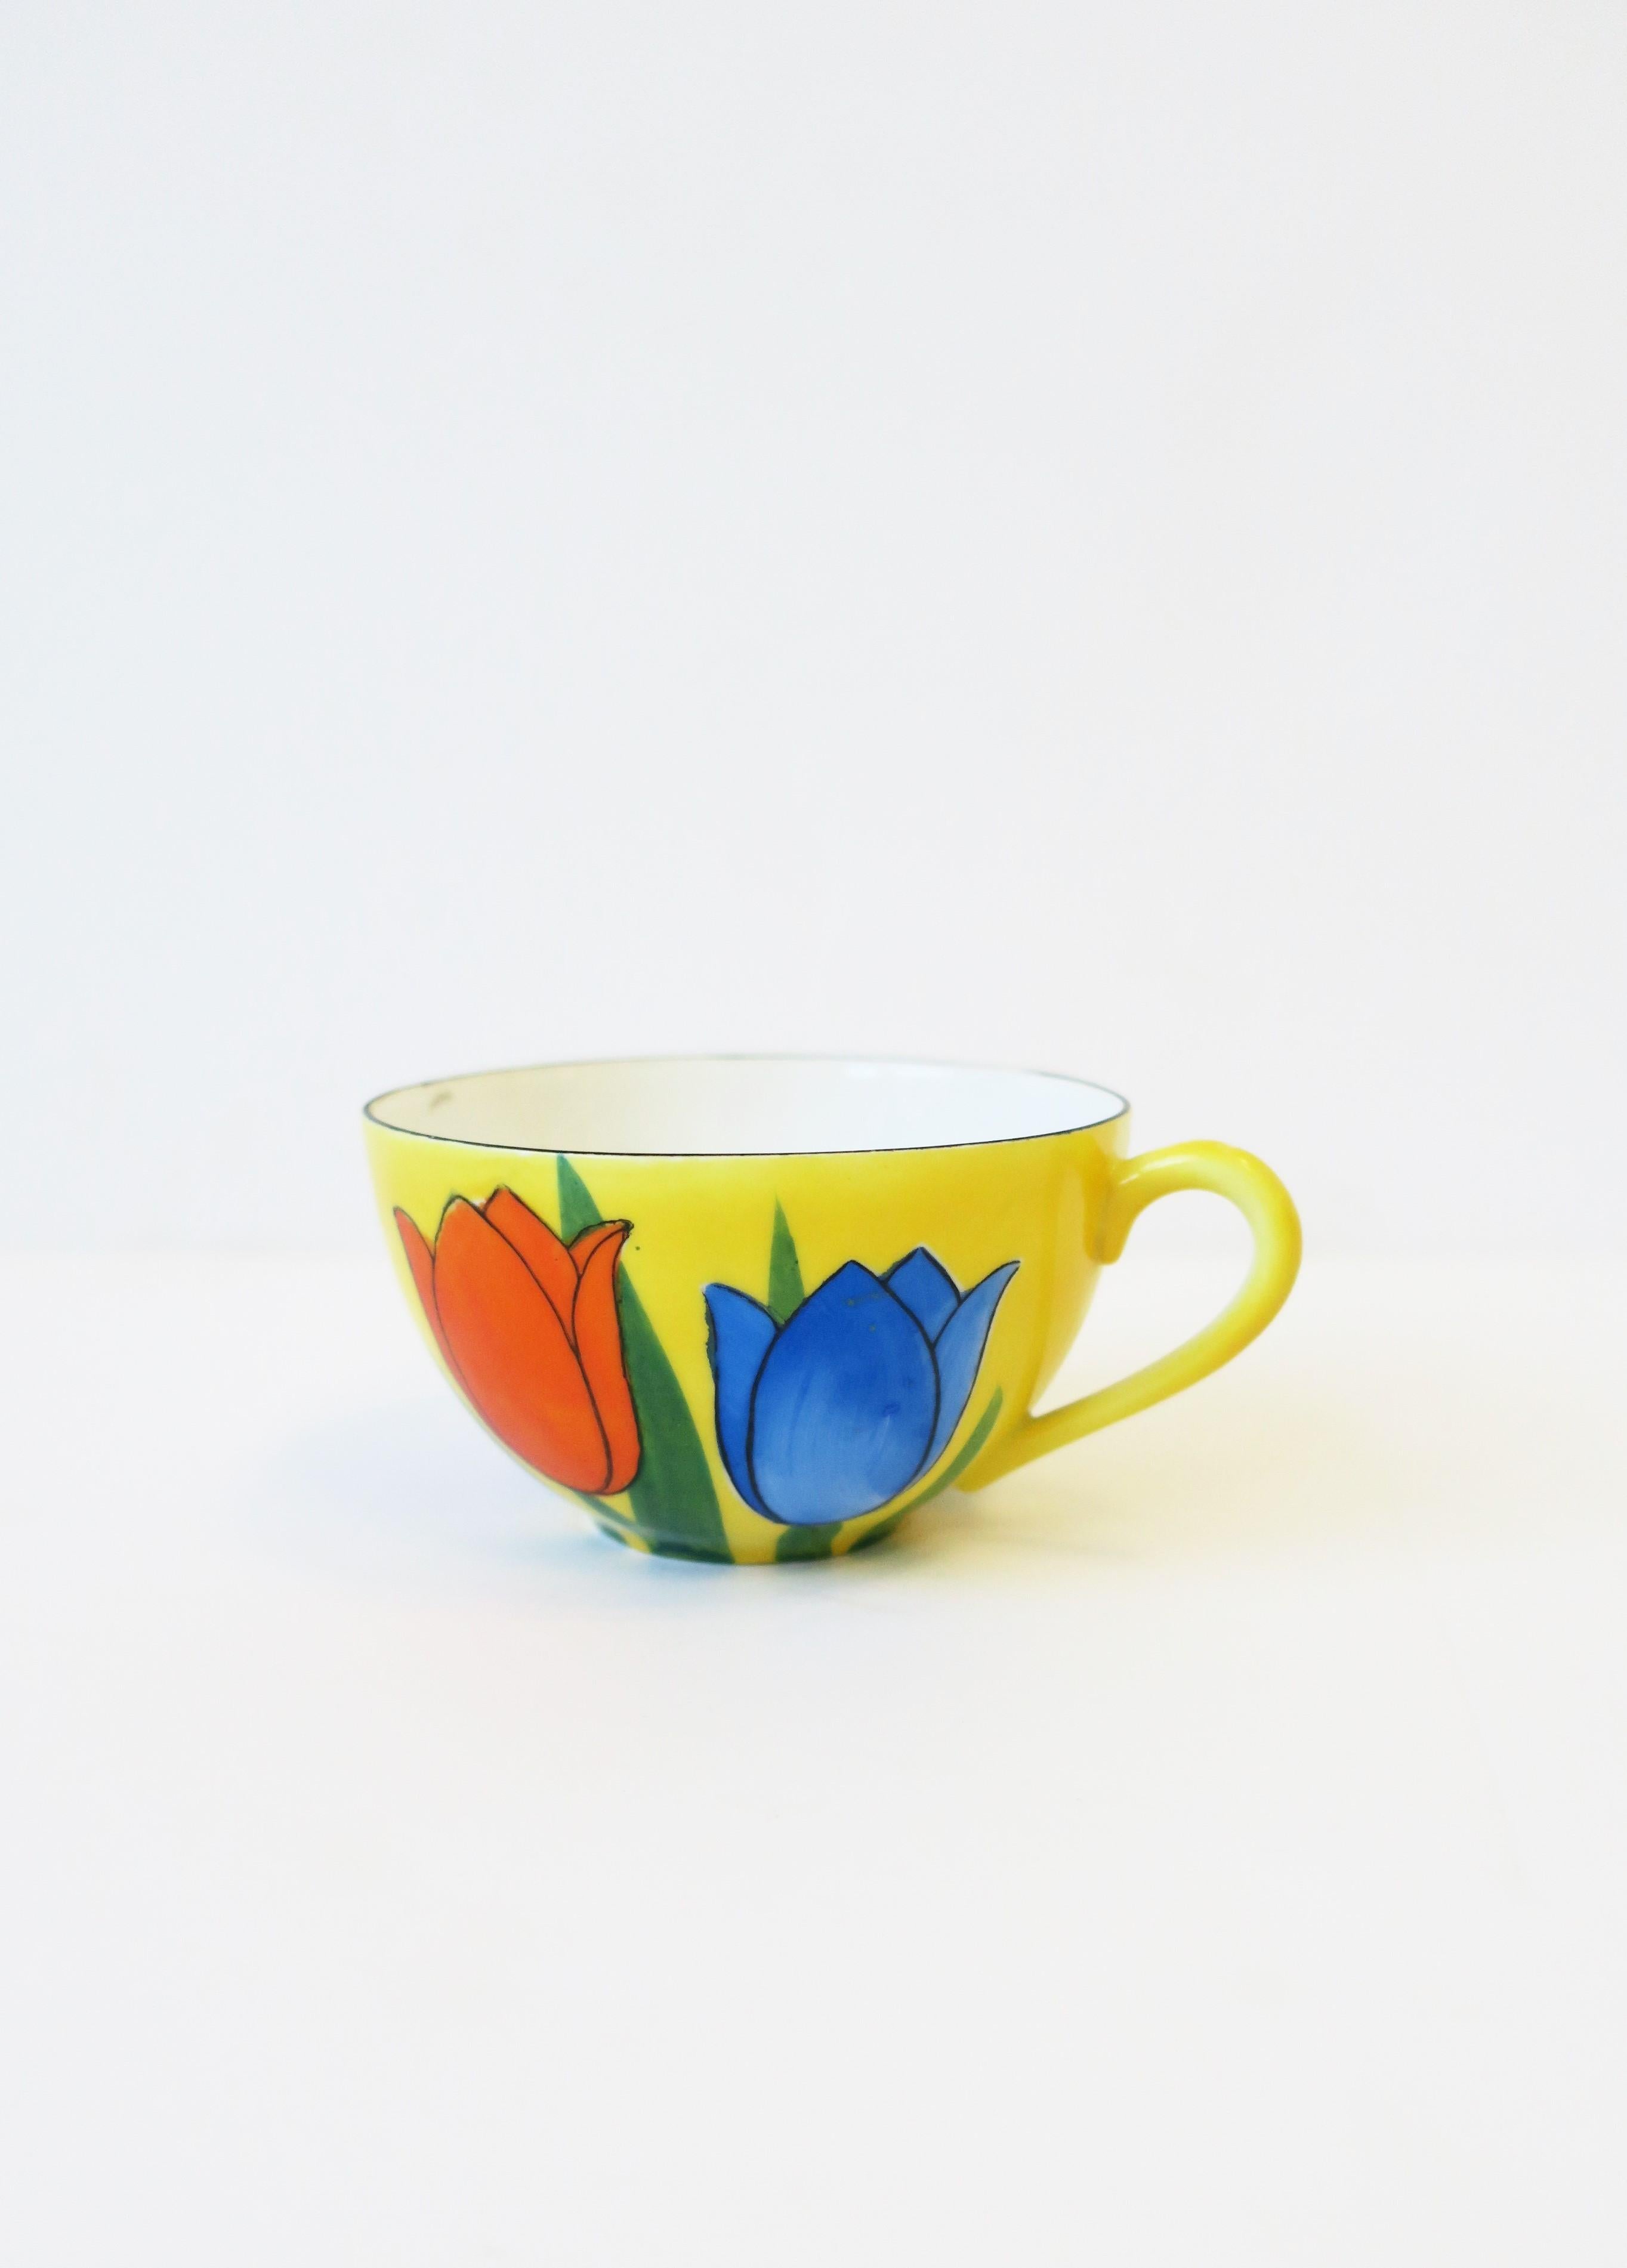 Yellow Porcelain Coffee or Tea Cup Saucer Set with Tulip Flowers For Sale 2